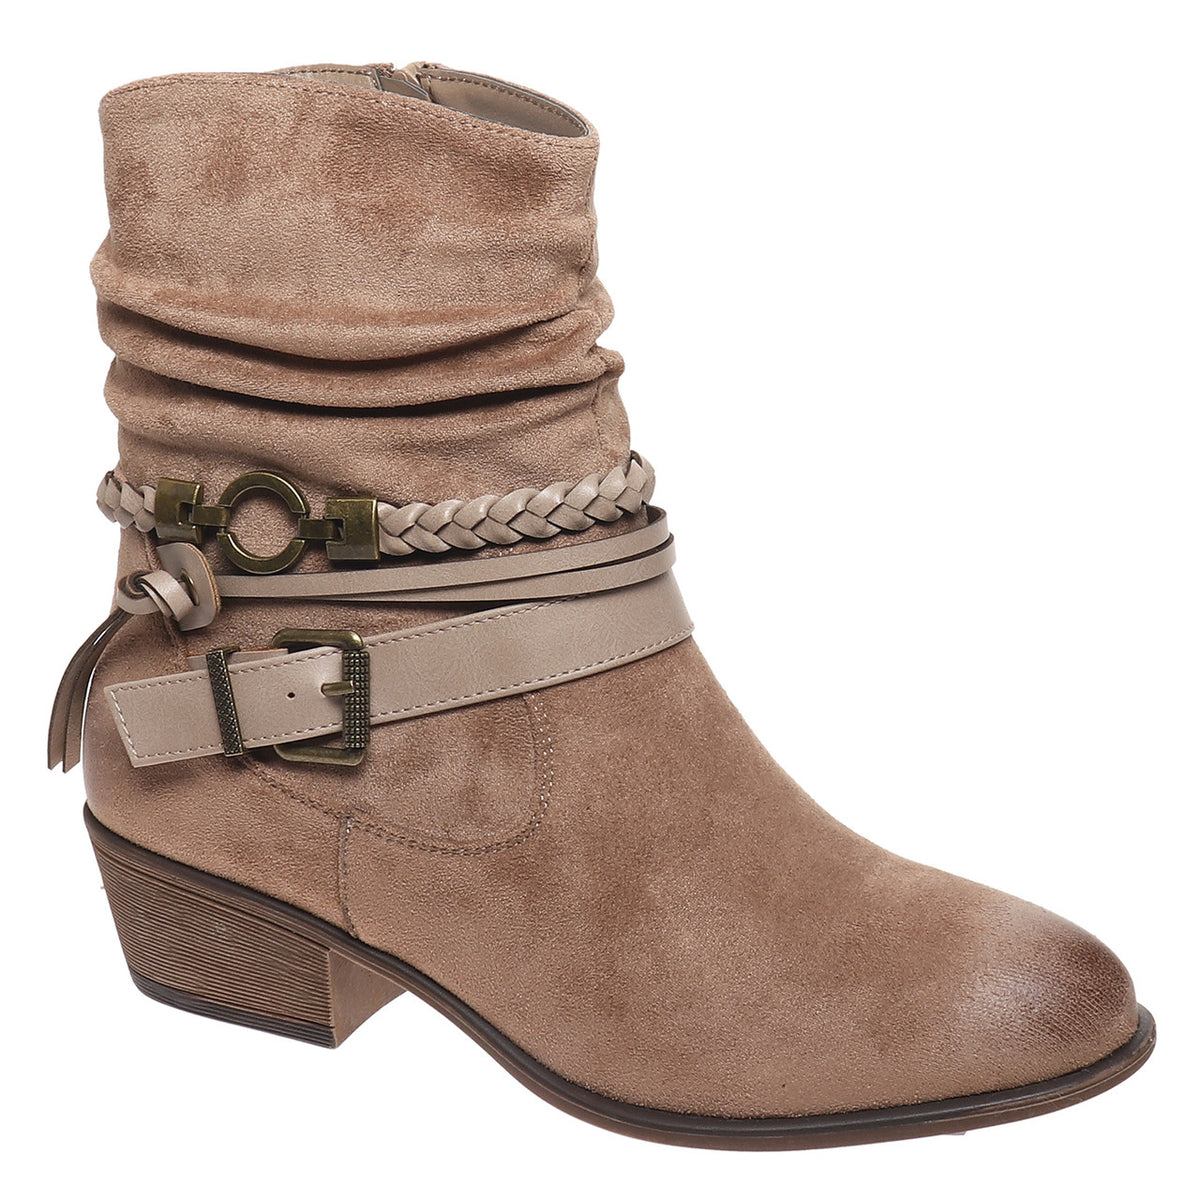 "May" Faux Suede Braids and Buckles Slouchy Bootie (Taupe)